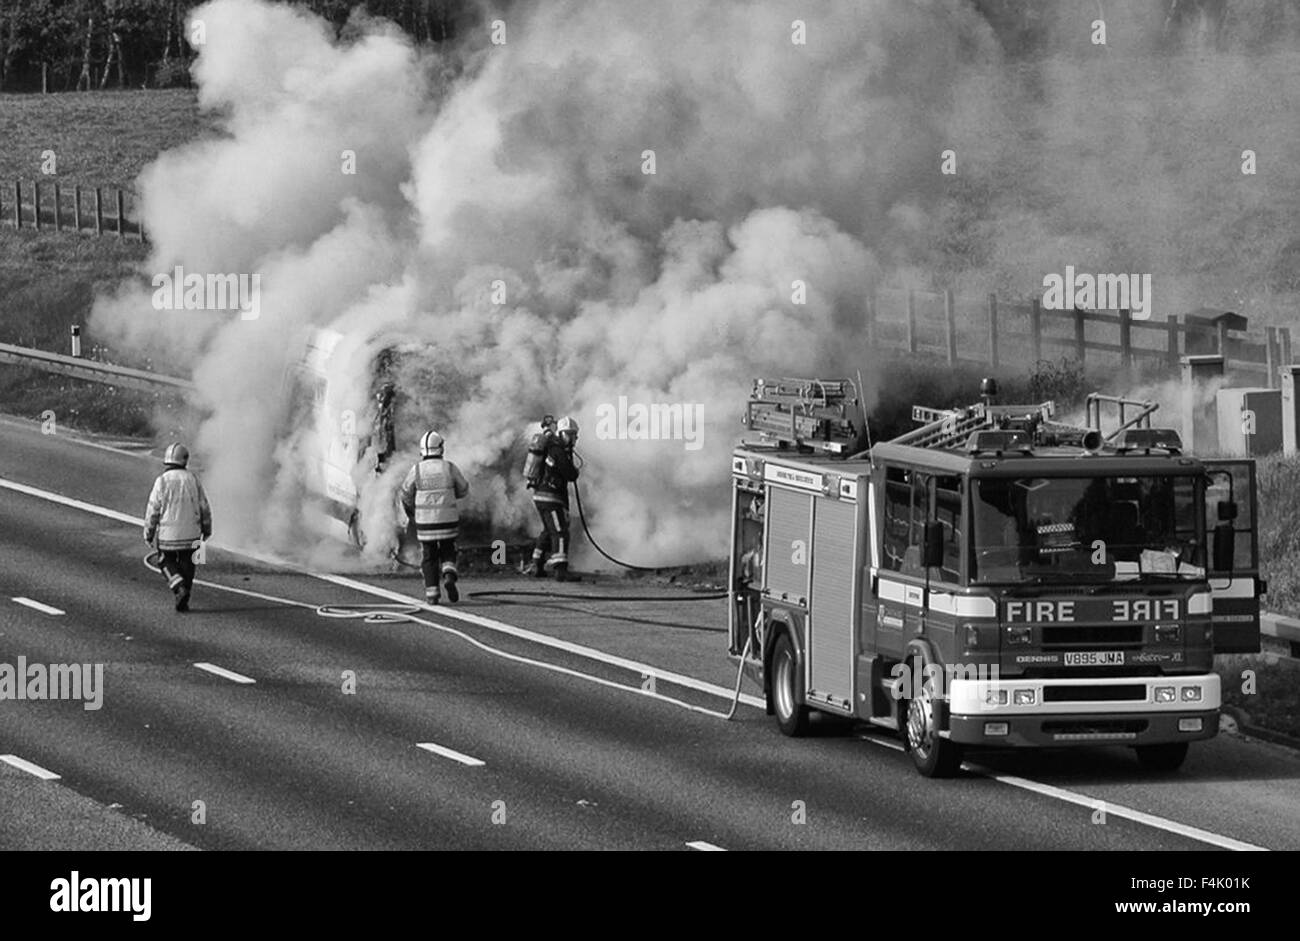 Firemen putting out a van fire on Motorway Stock Photo